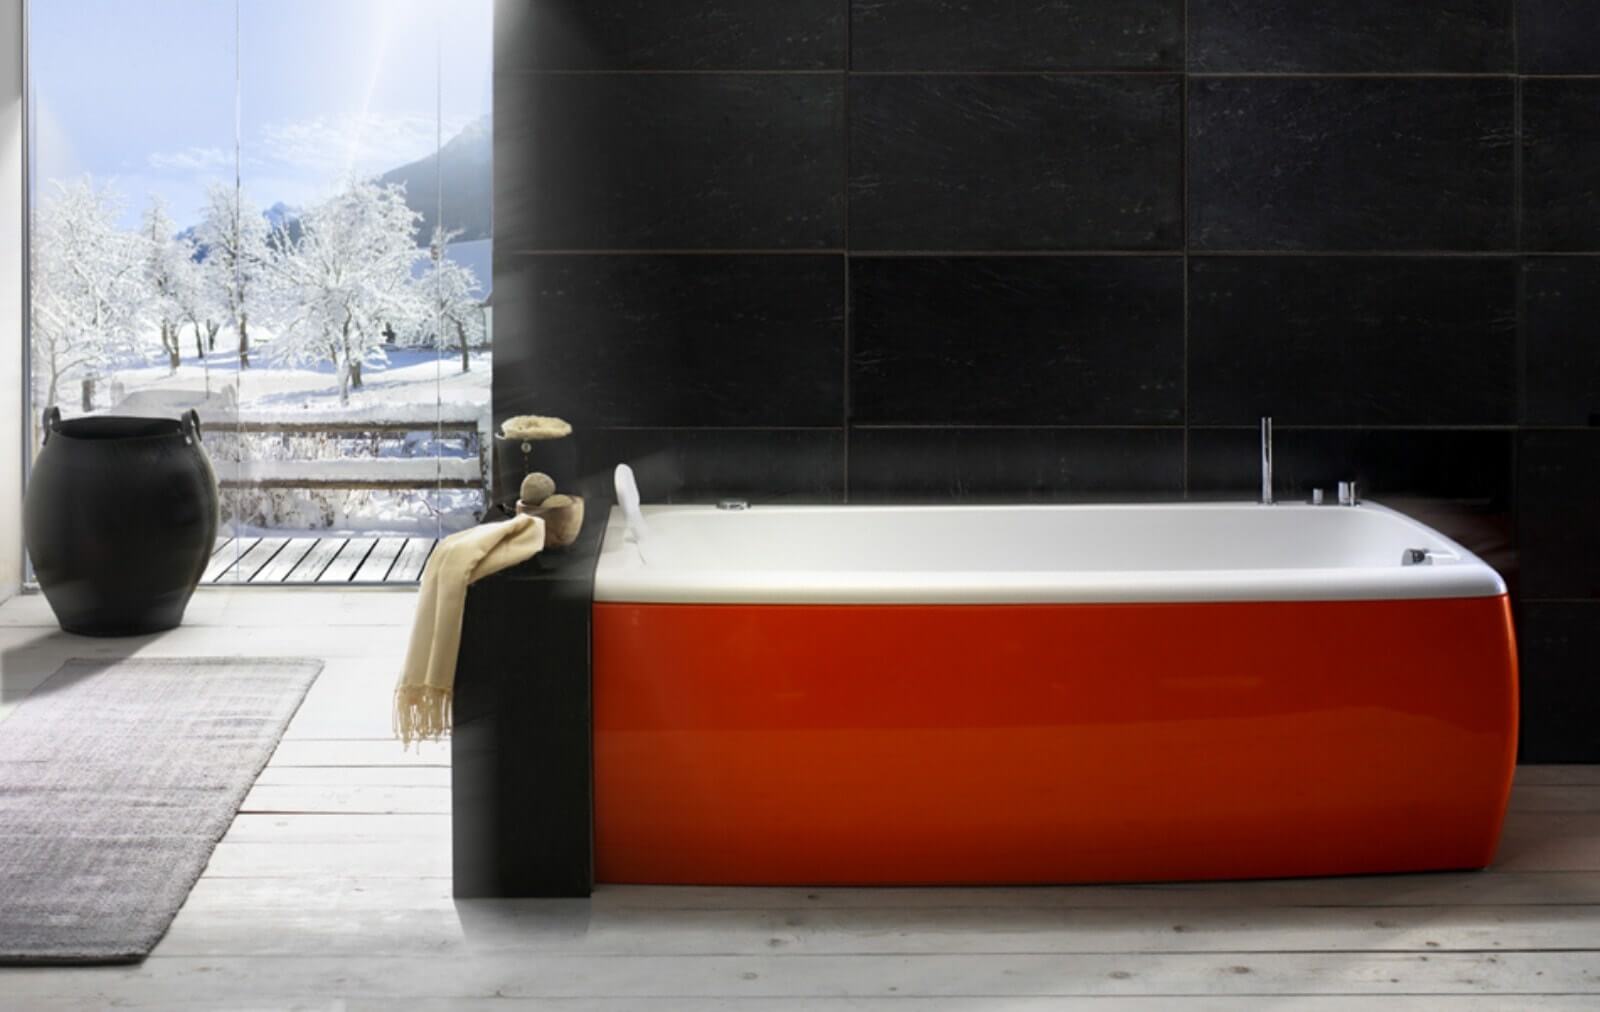 red-and-white-rectangular-bathtub-with-headrest-in-one-side